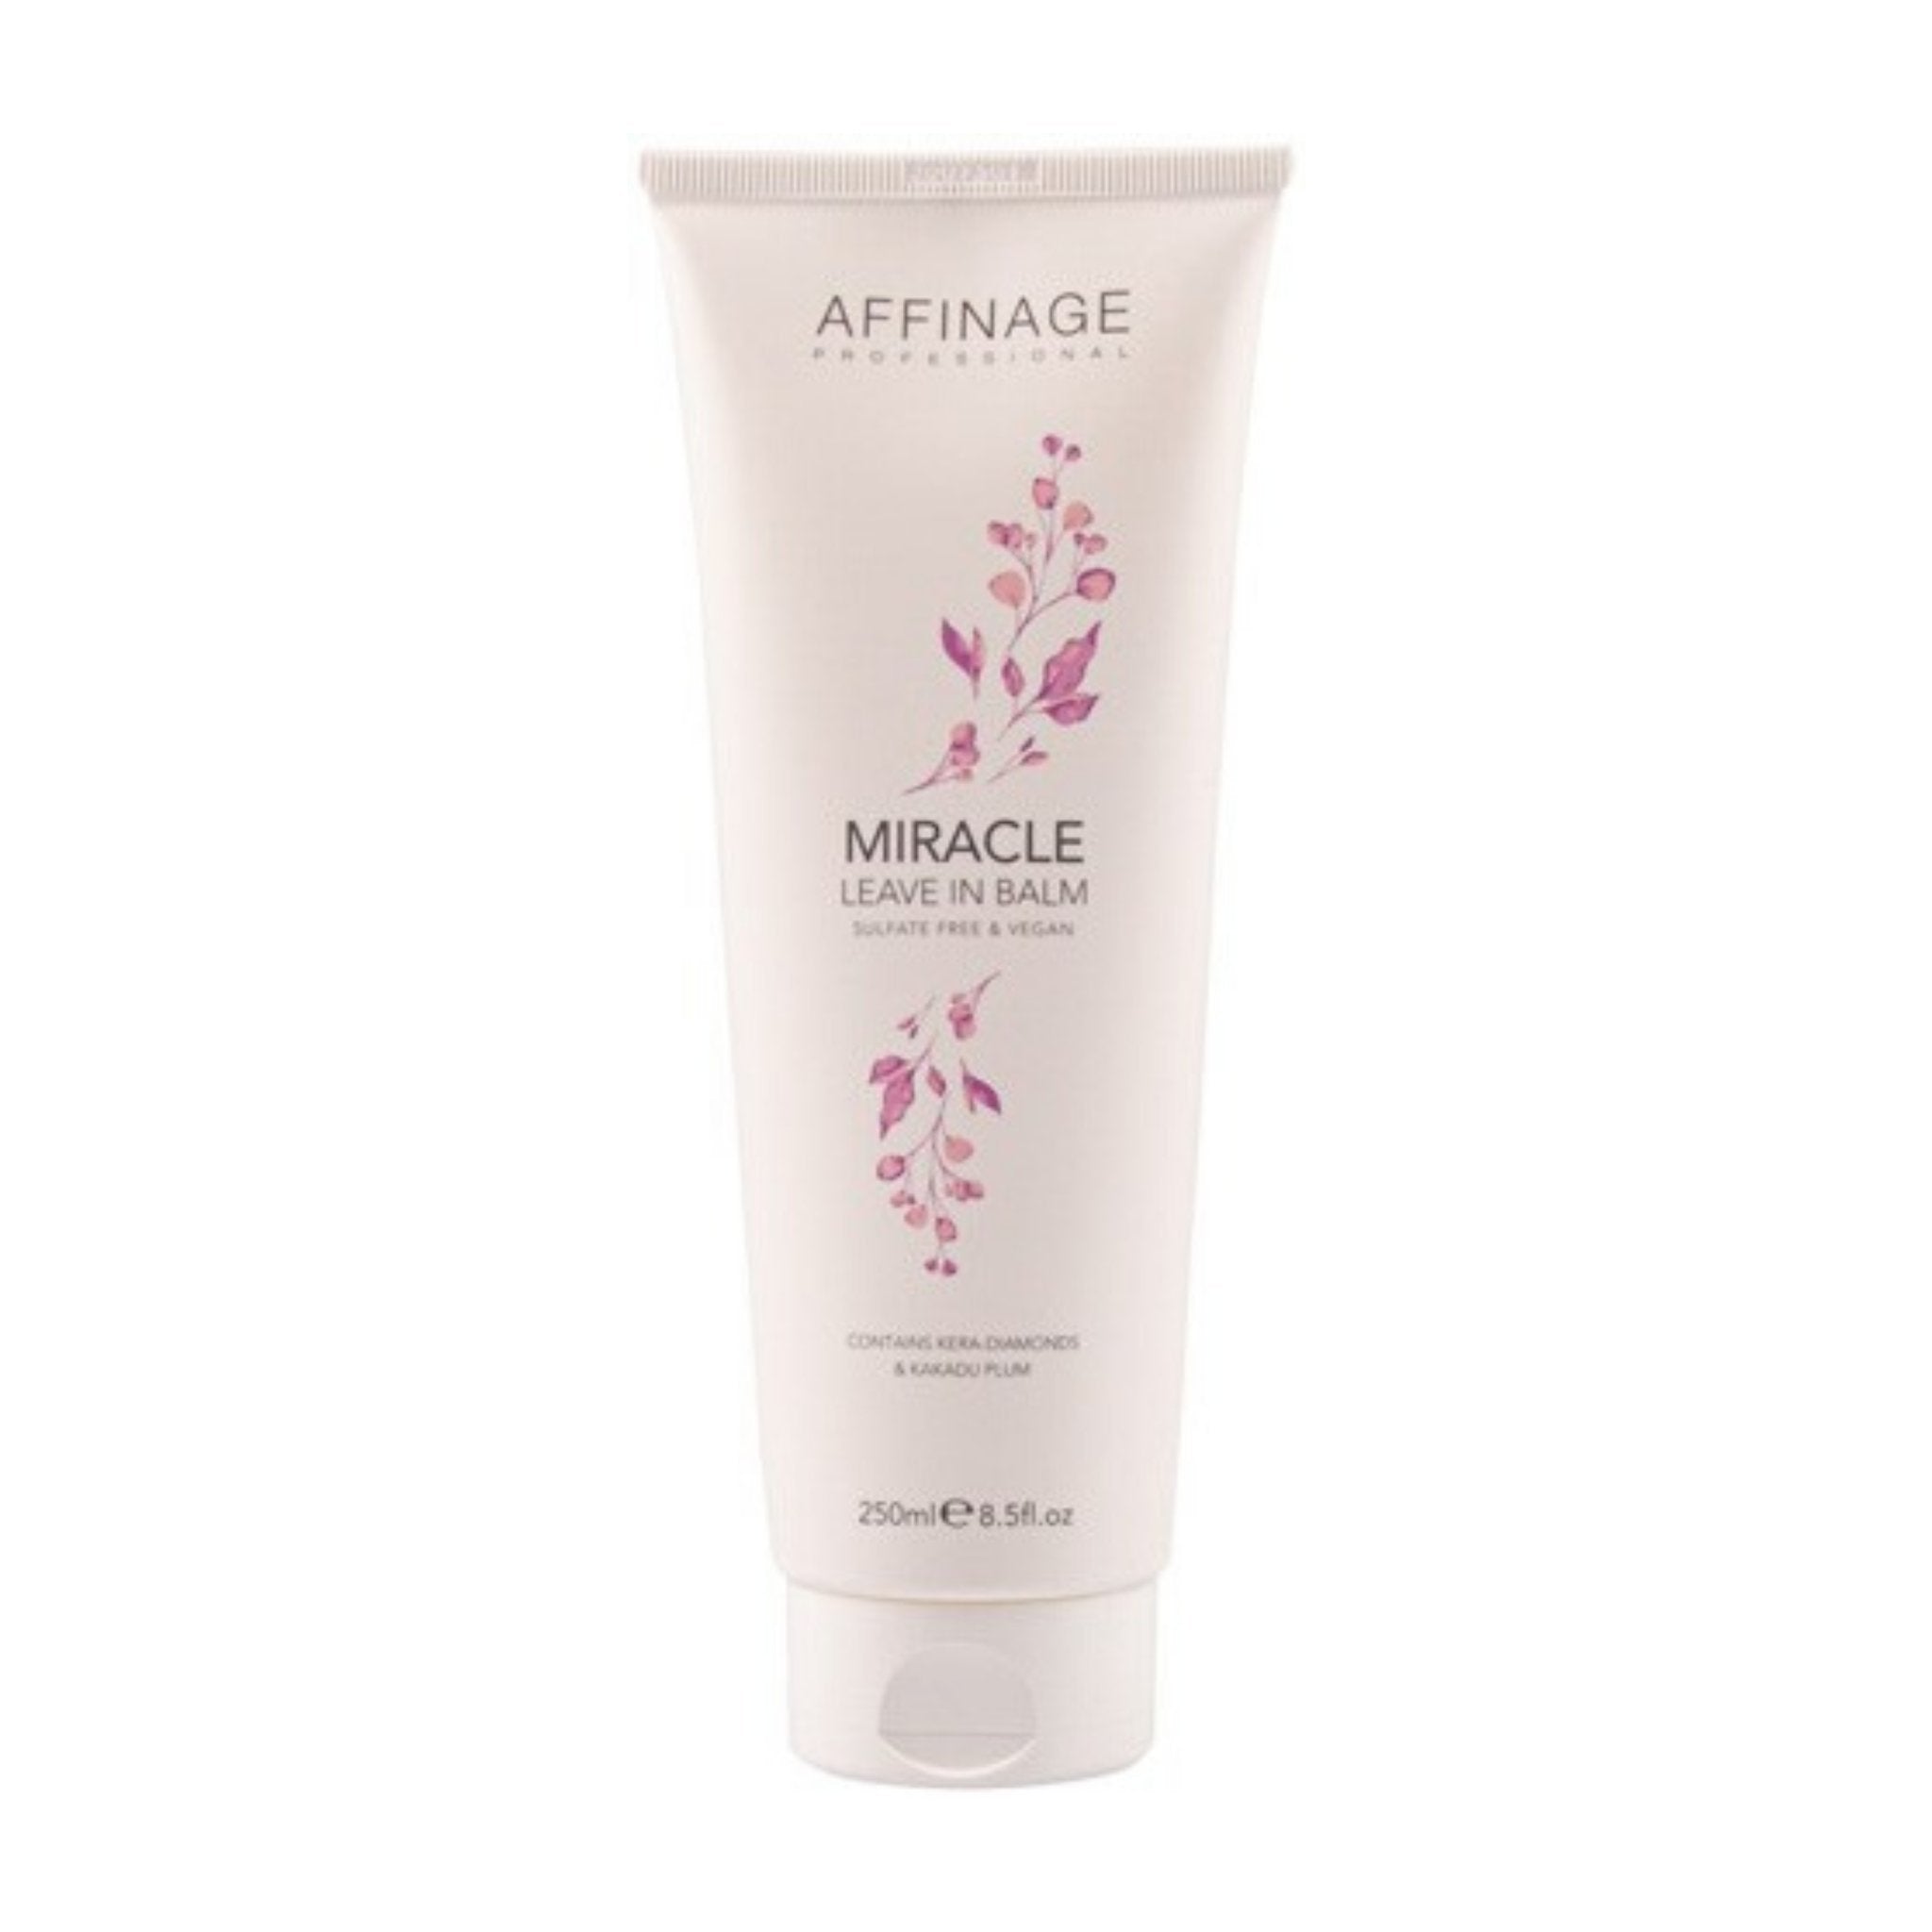 Affinage Cleanse & Care Miracle Leave In Balm 250ml - HairBeautyInk